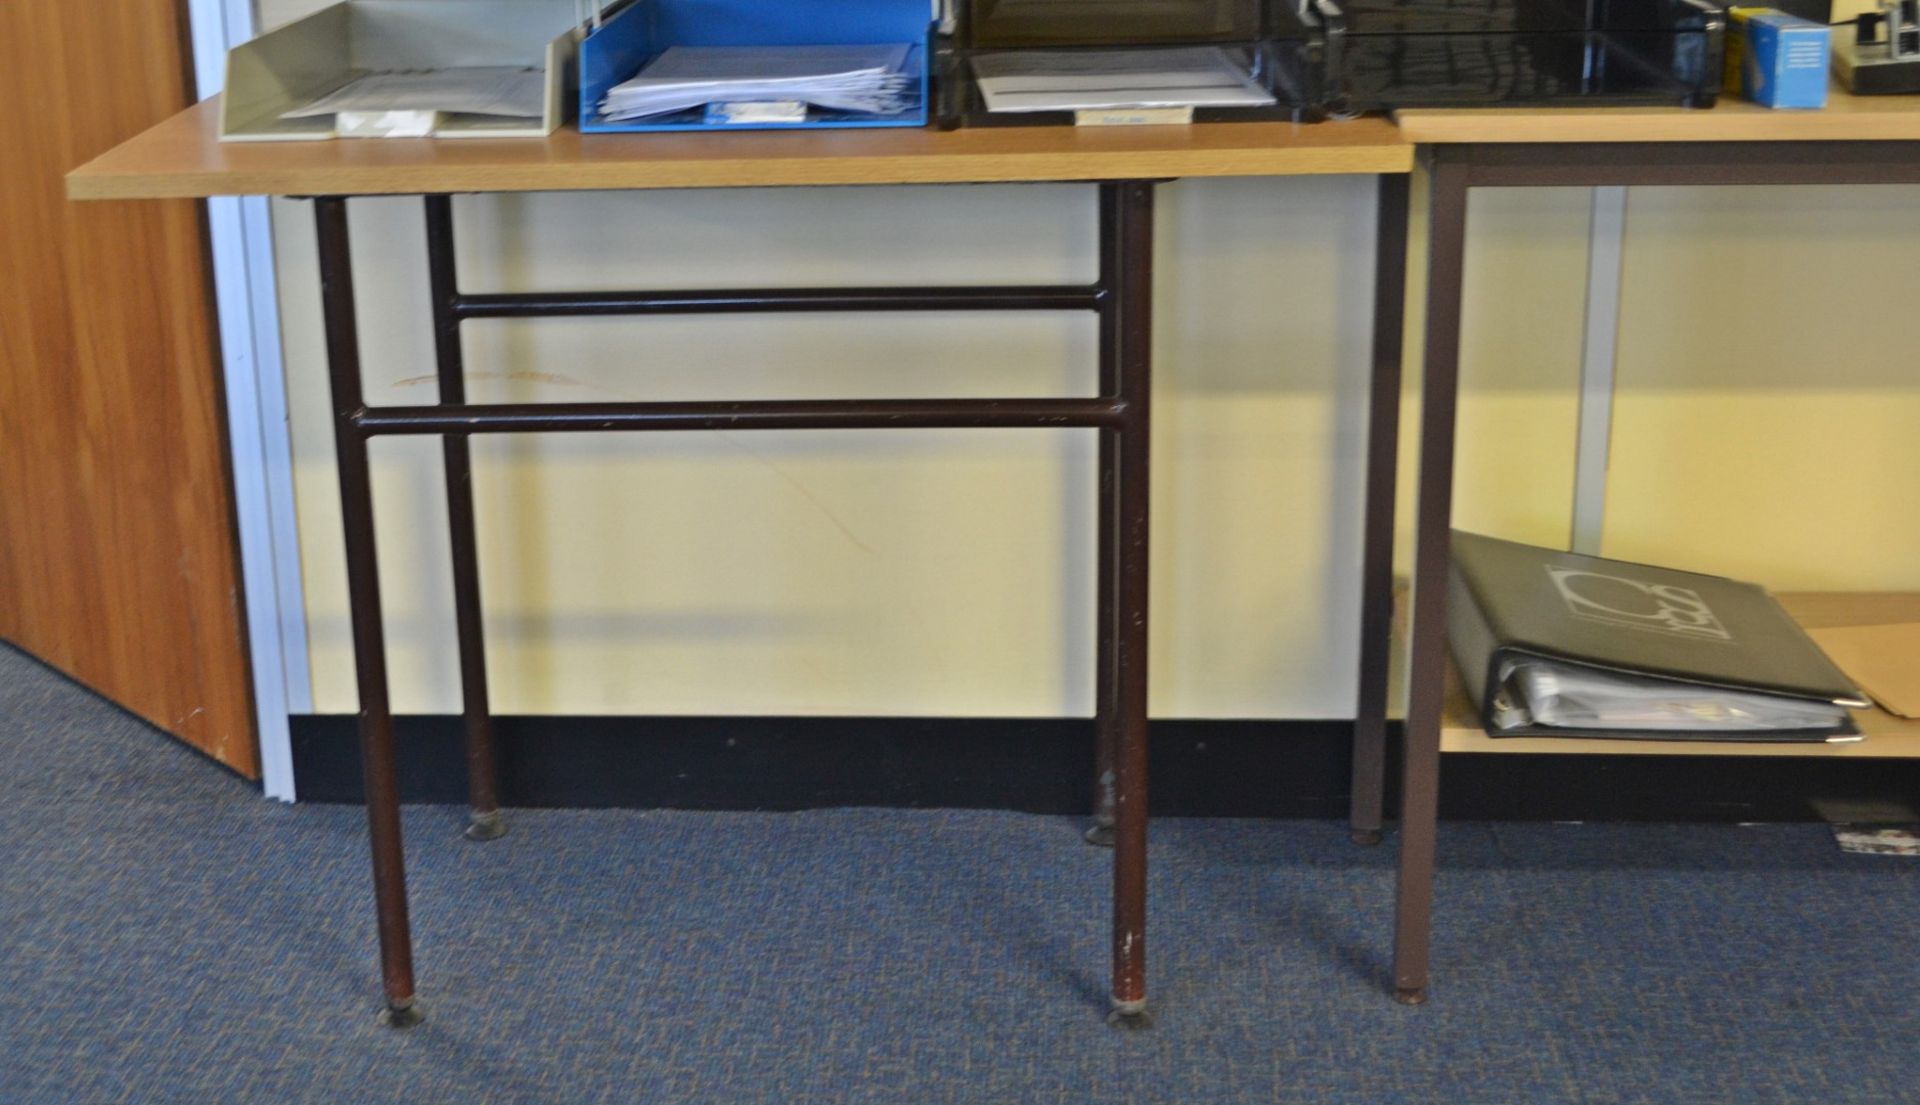 4 x Small Side Office Tables - Ref: VM360, VM363 - CL409 - Location: Wakefield WF16 - Image 7 of 7